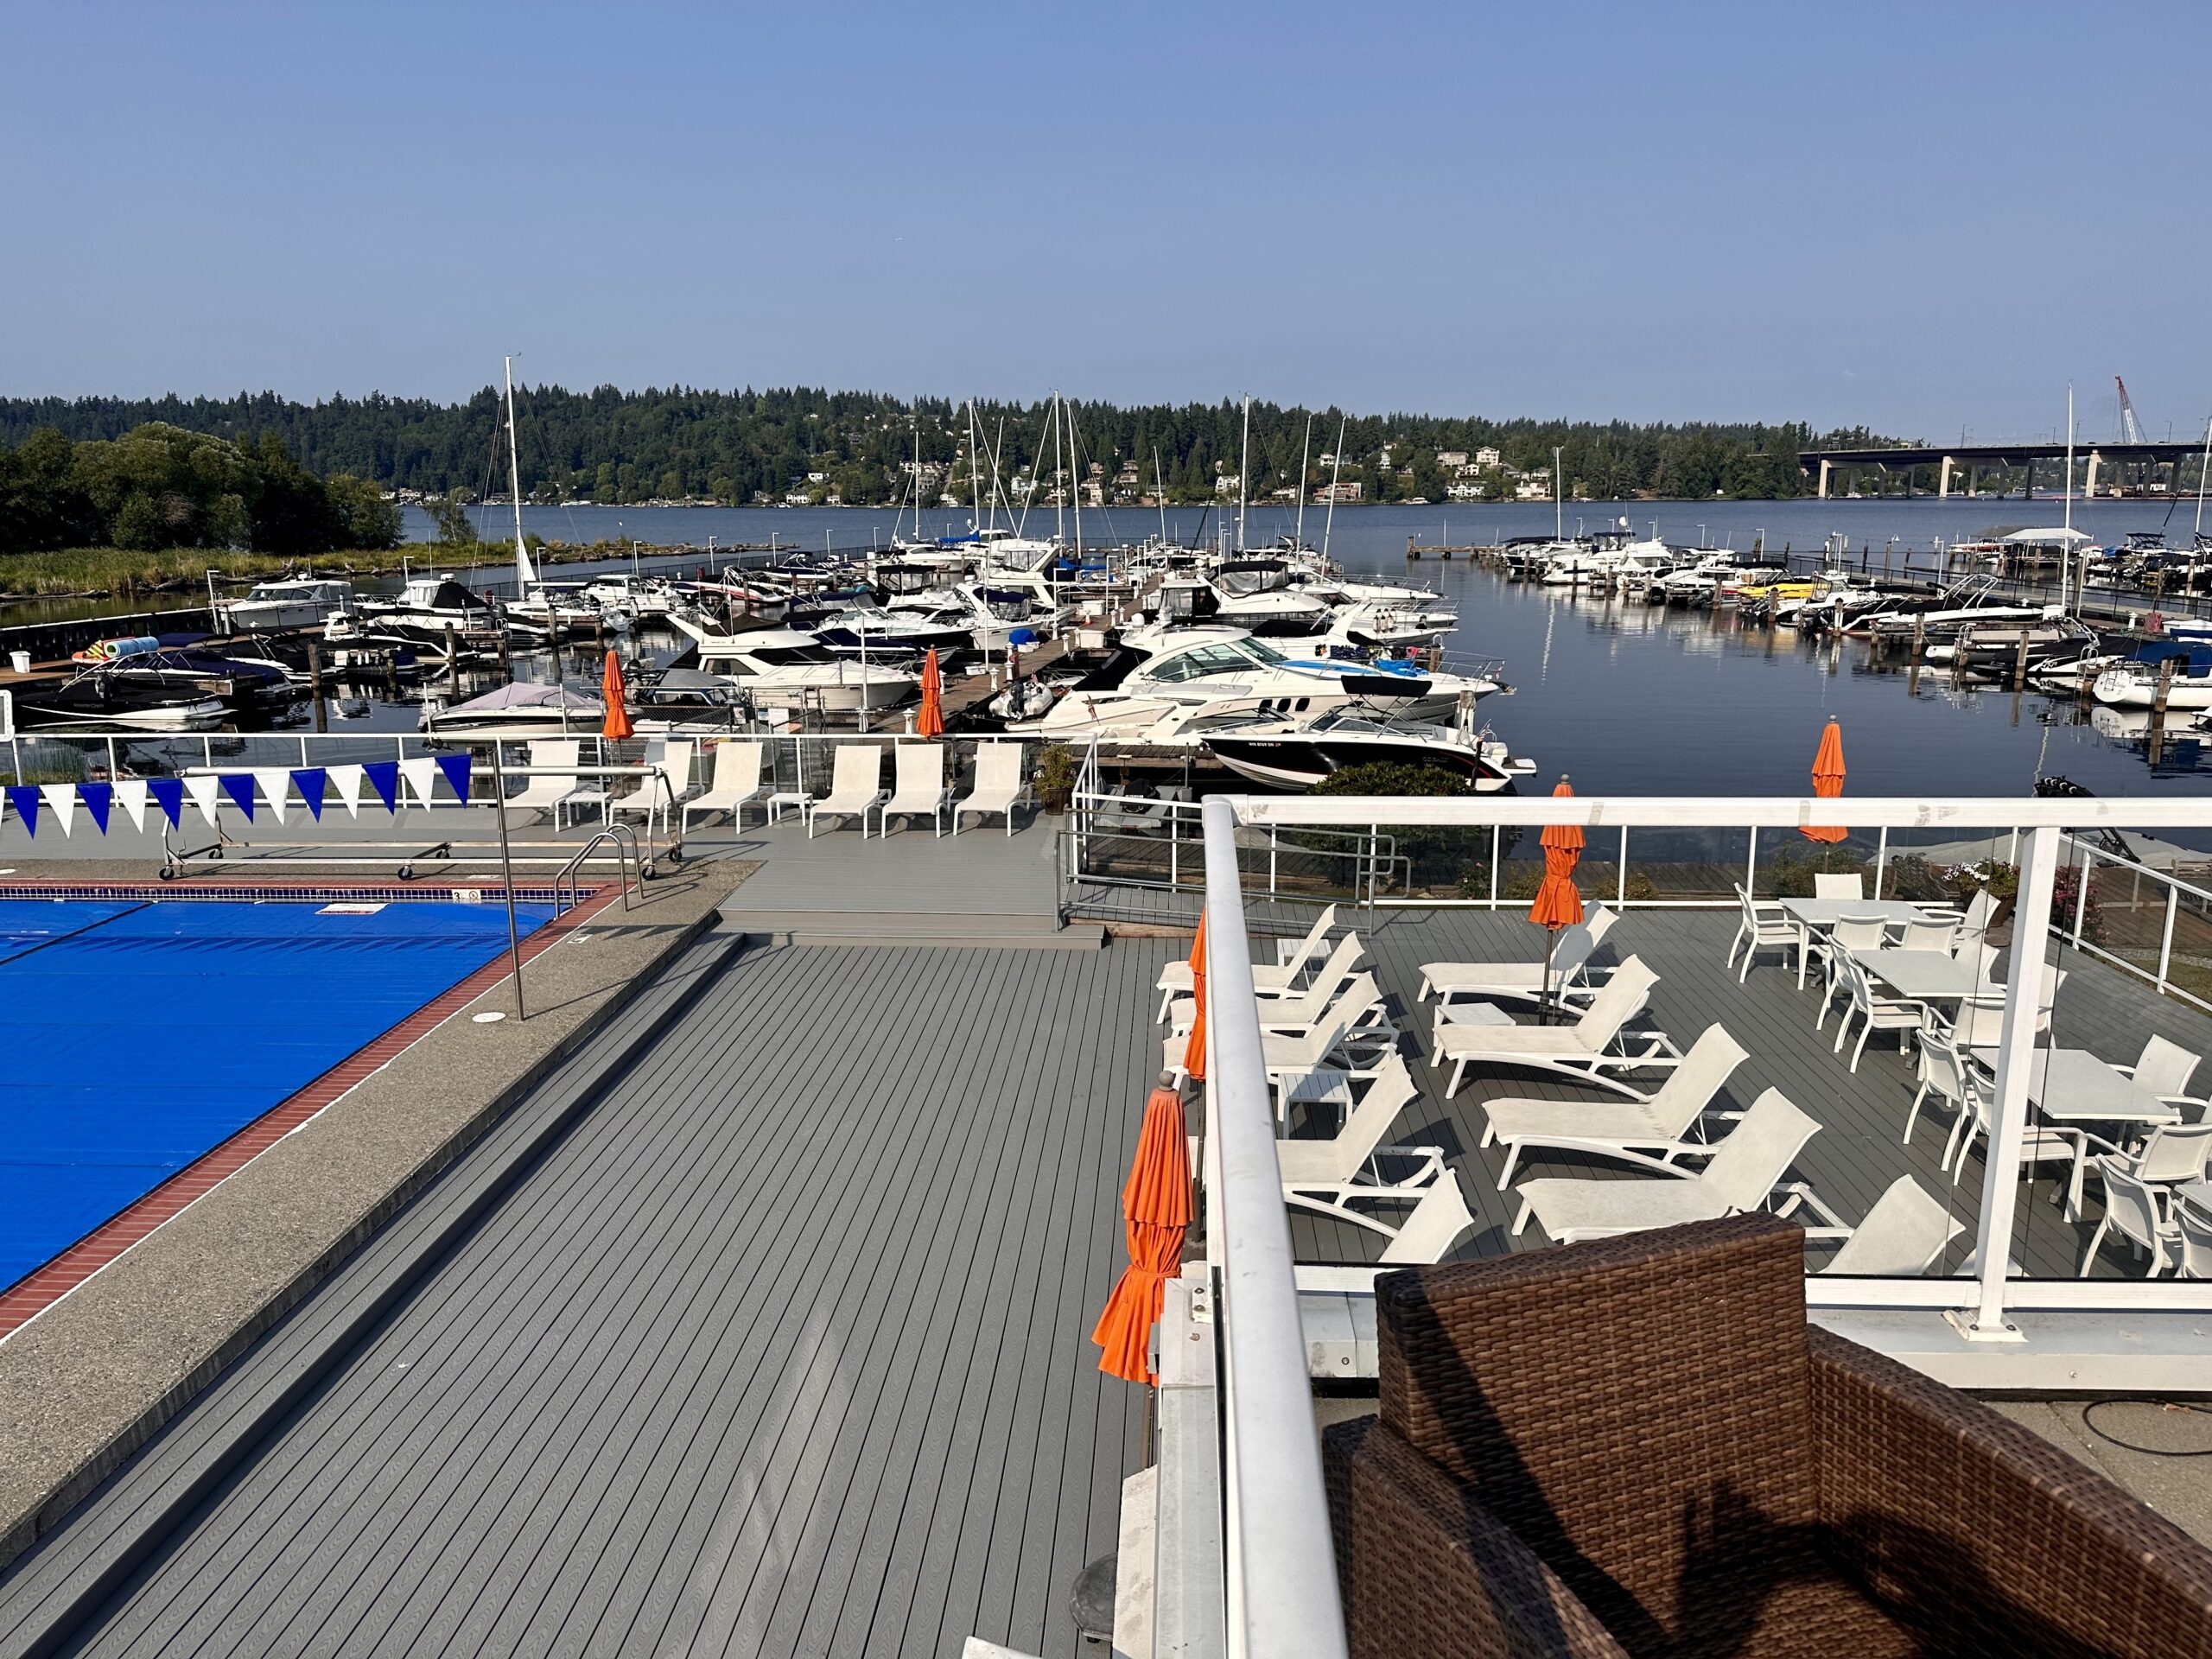 Newport Shores Yacht Club Marina, Photo Courtesy: The Brazen’s at Windermere Real Estate/Bellevue Commons